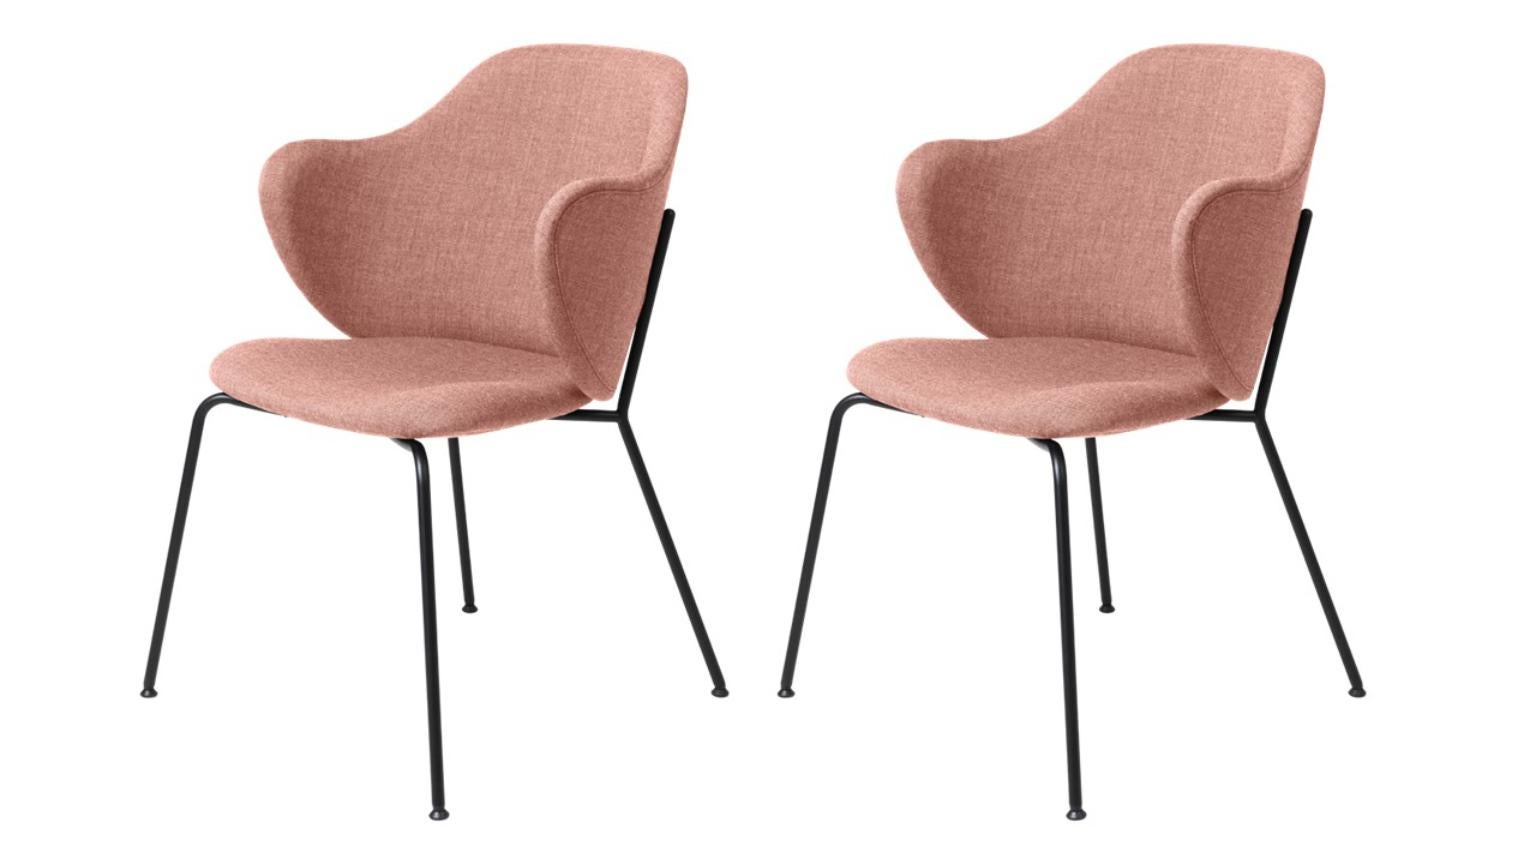 Set of 2 rose remix lassen chairs by Lassen
Dimensions: W 58 x D 60 x H 88 cm 
Materials: textile

The Lassen chair by Flemming Lassen, Magnus Sangild and Marianne Viktor was launched in 2018 as an ode to Flemming Lassen’s uncompromising